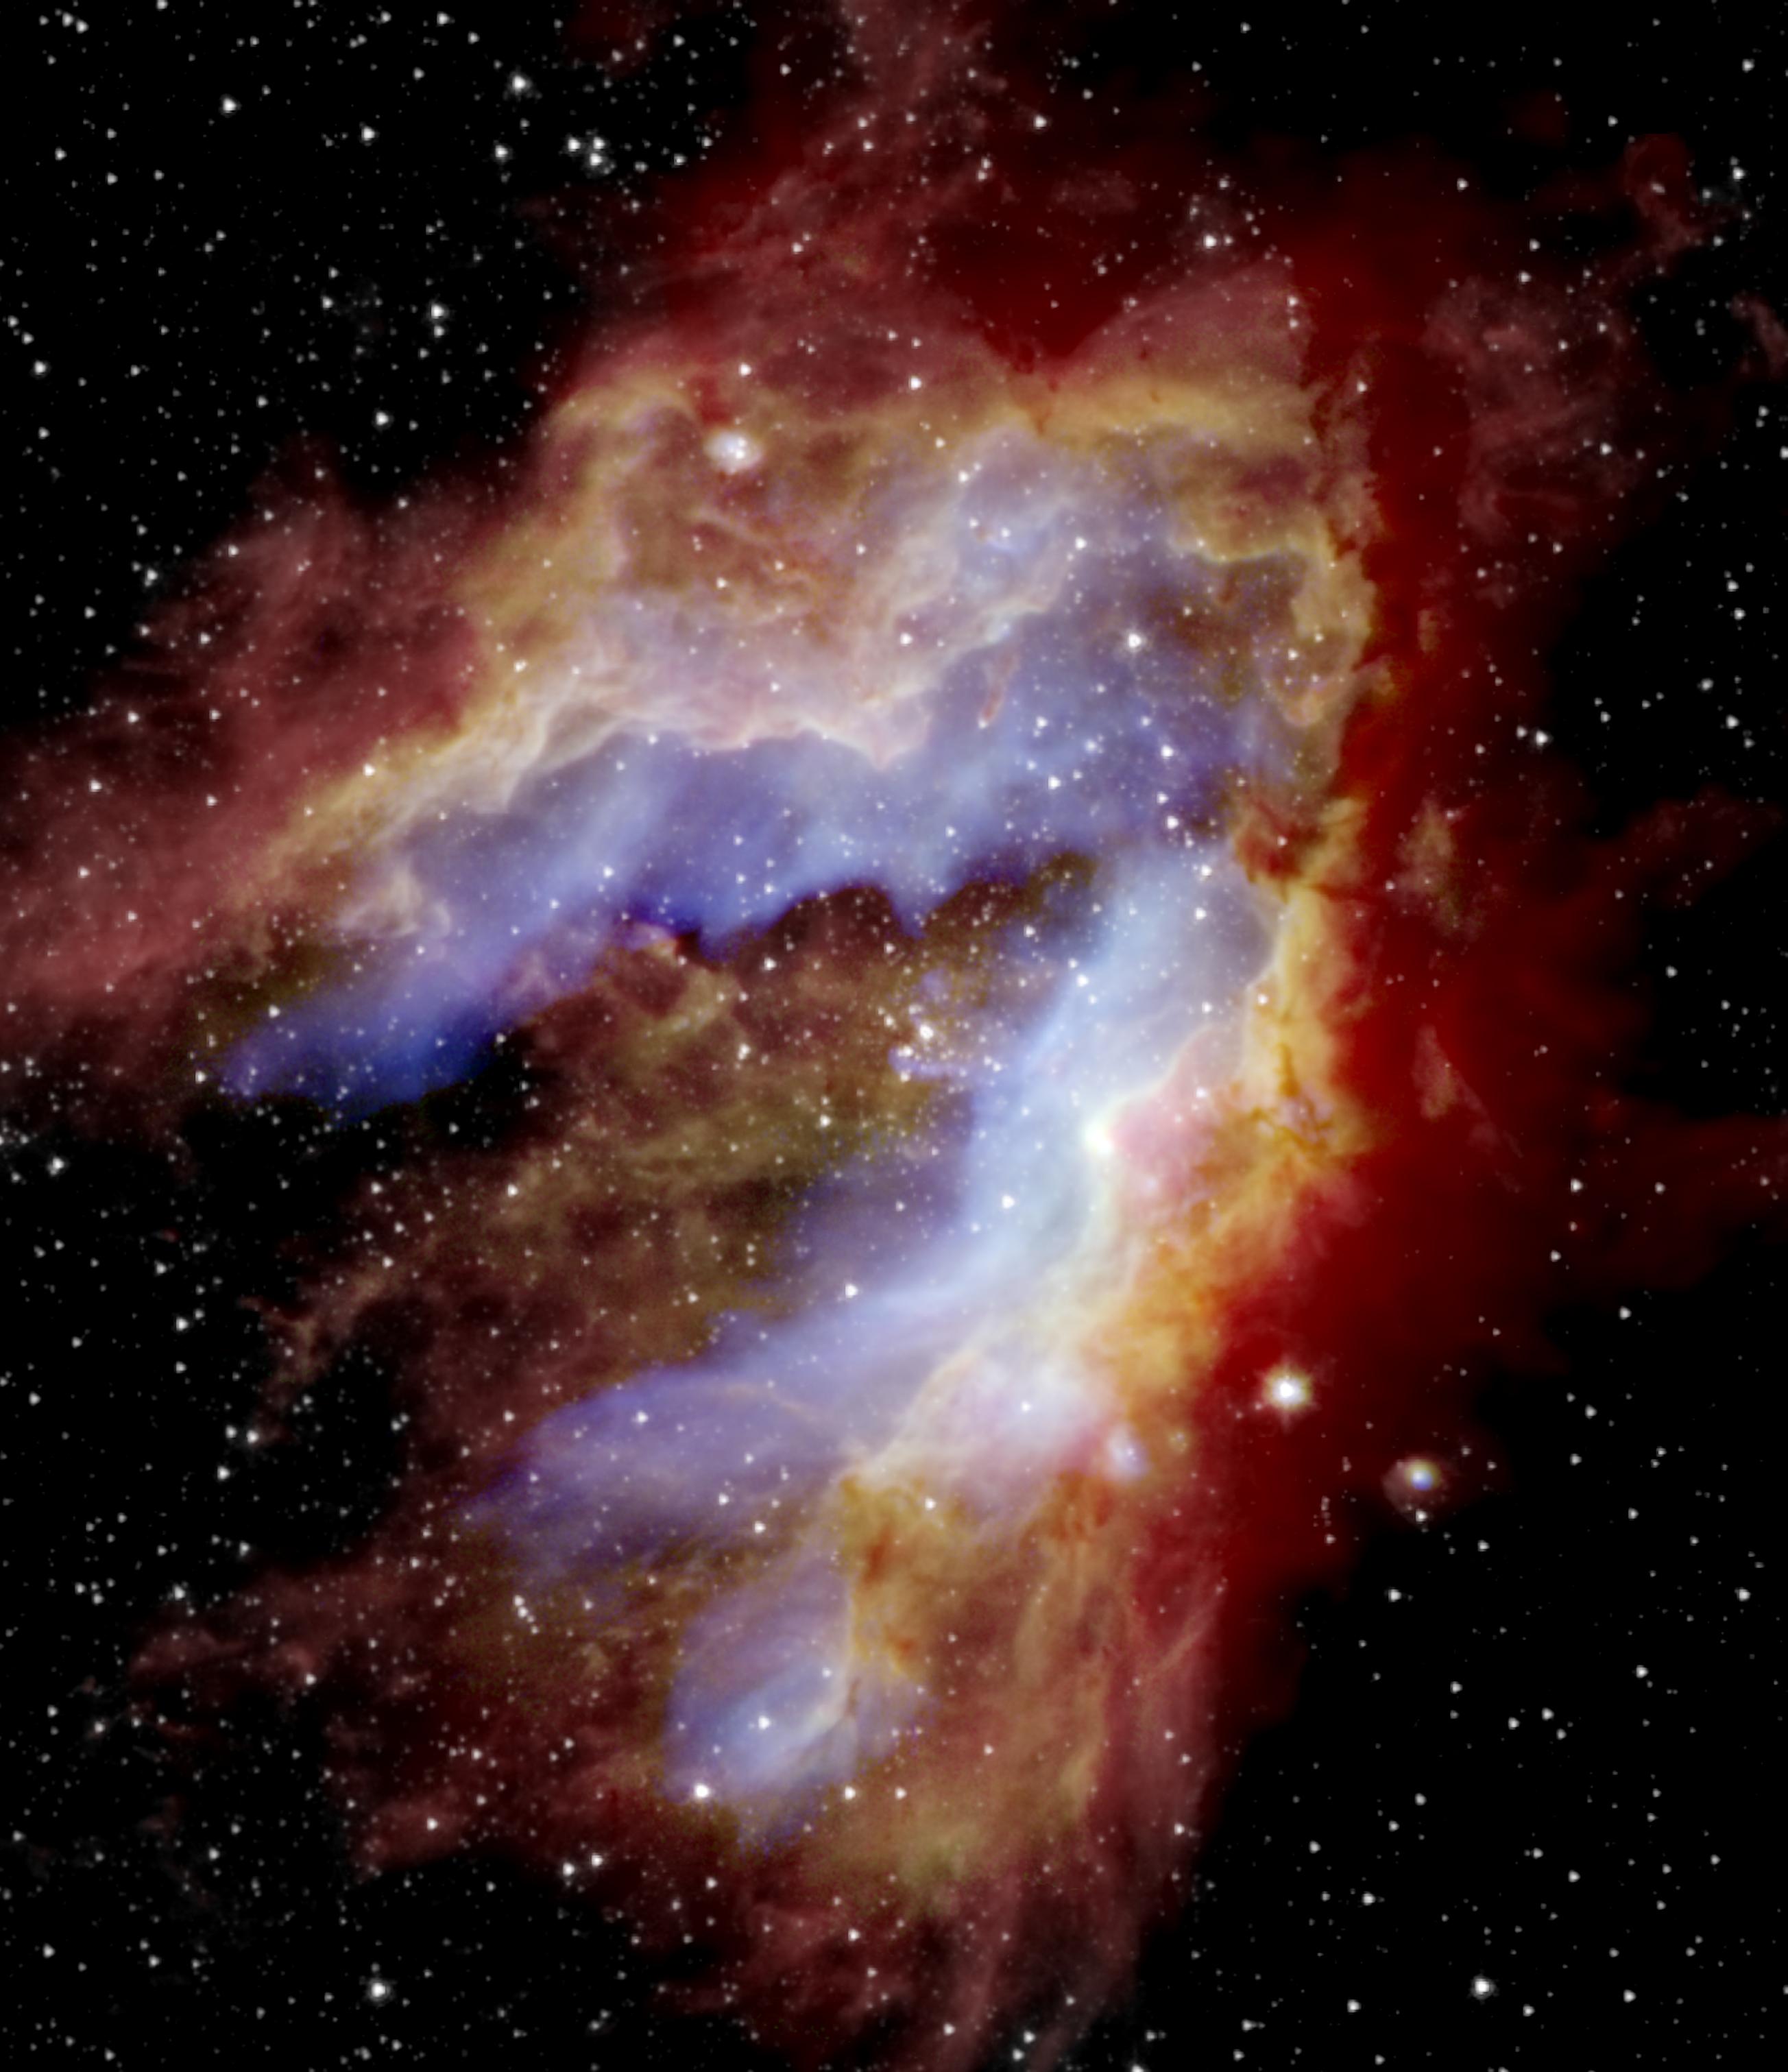 A composite image of the Omega, or Swan, Nebula